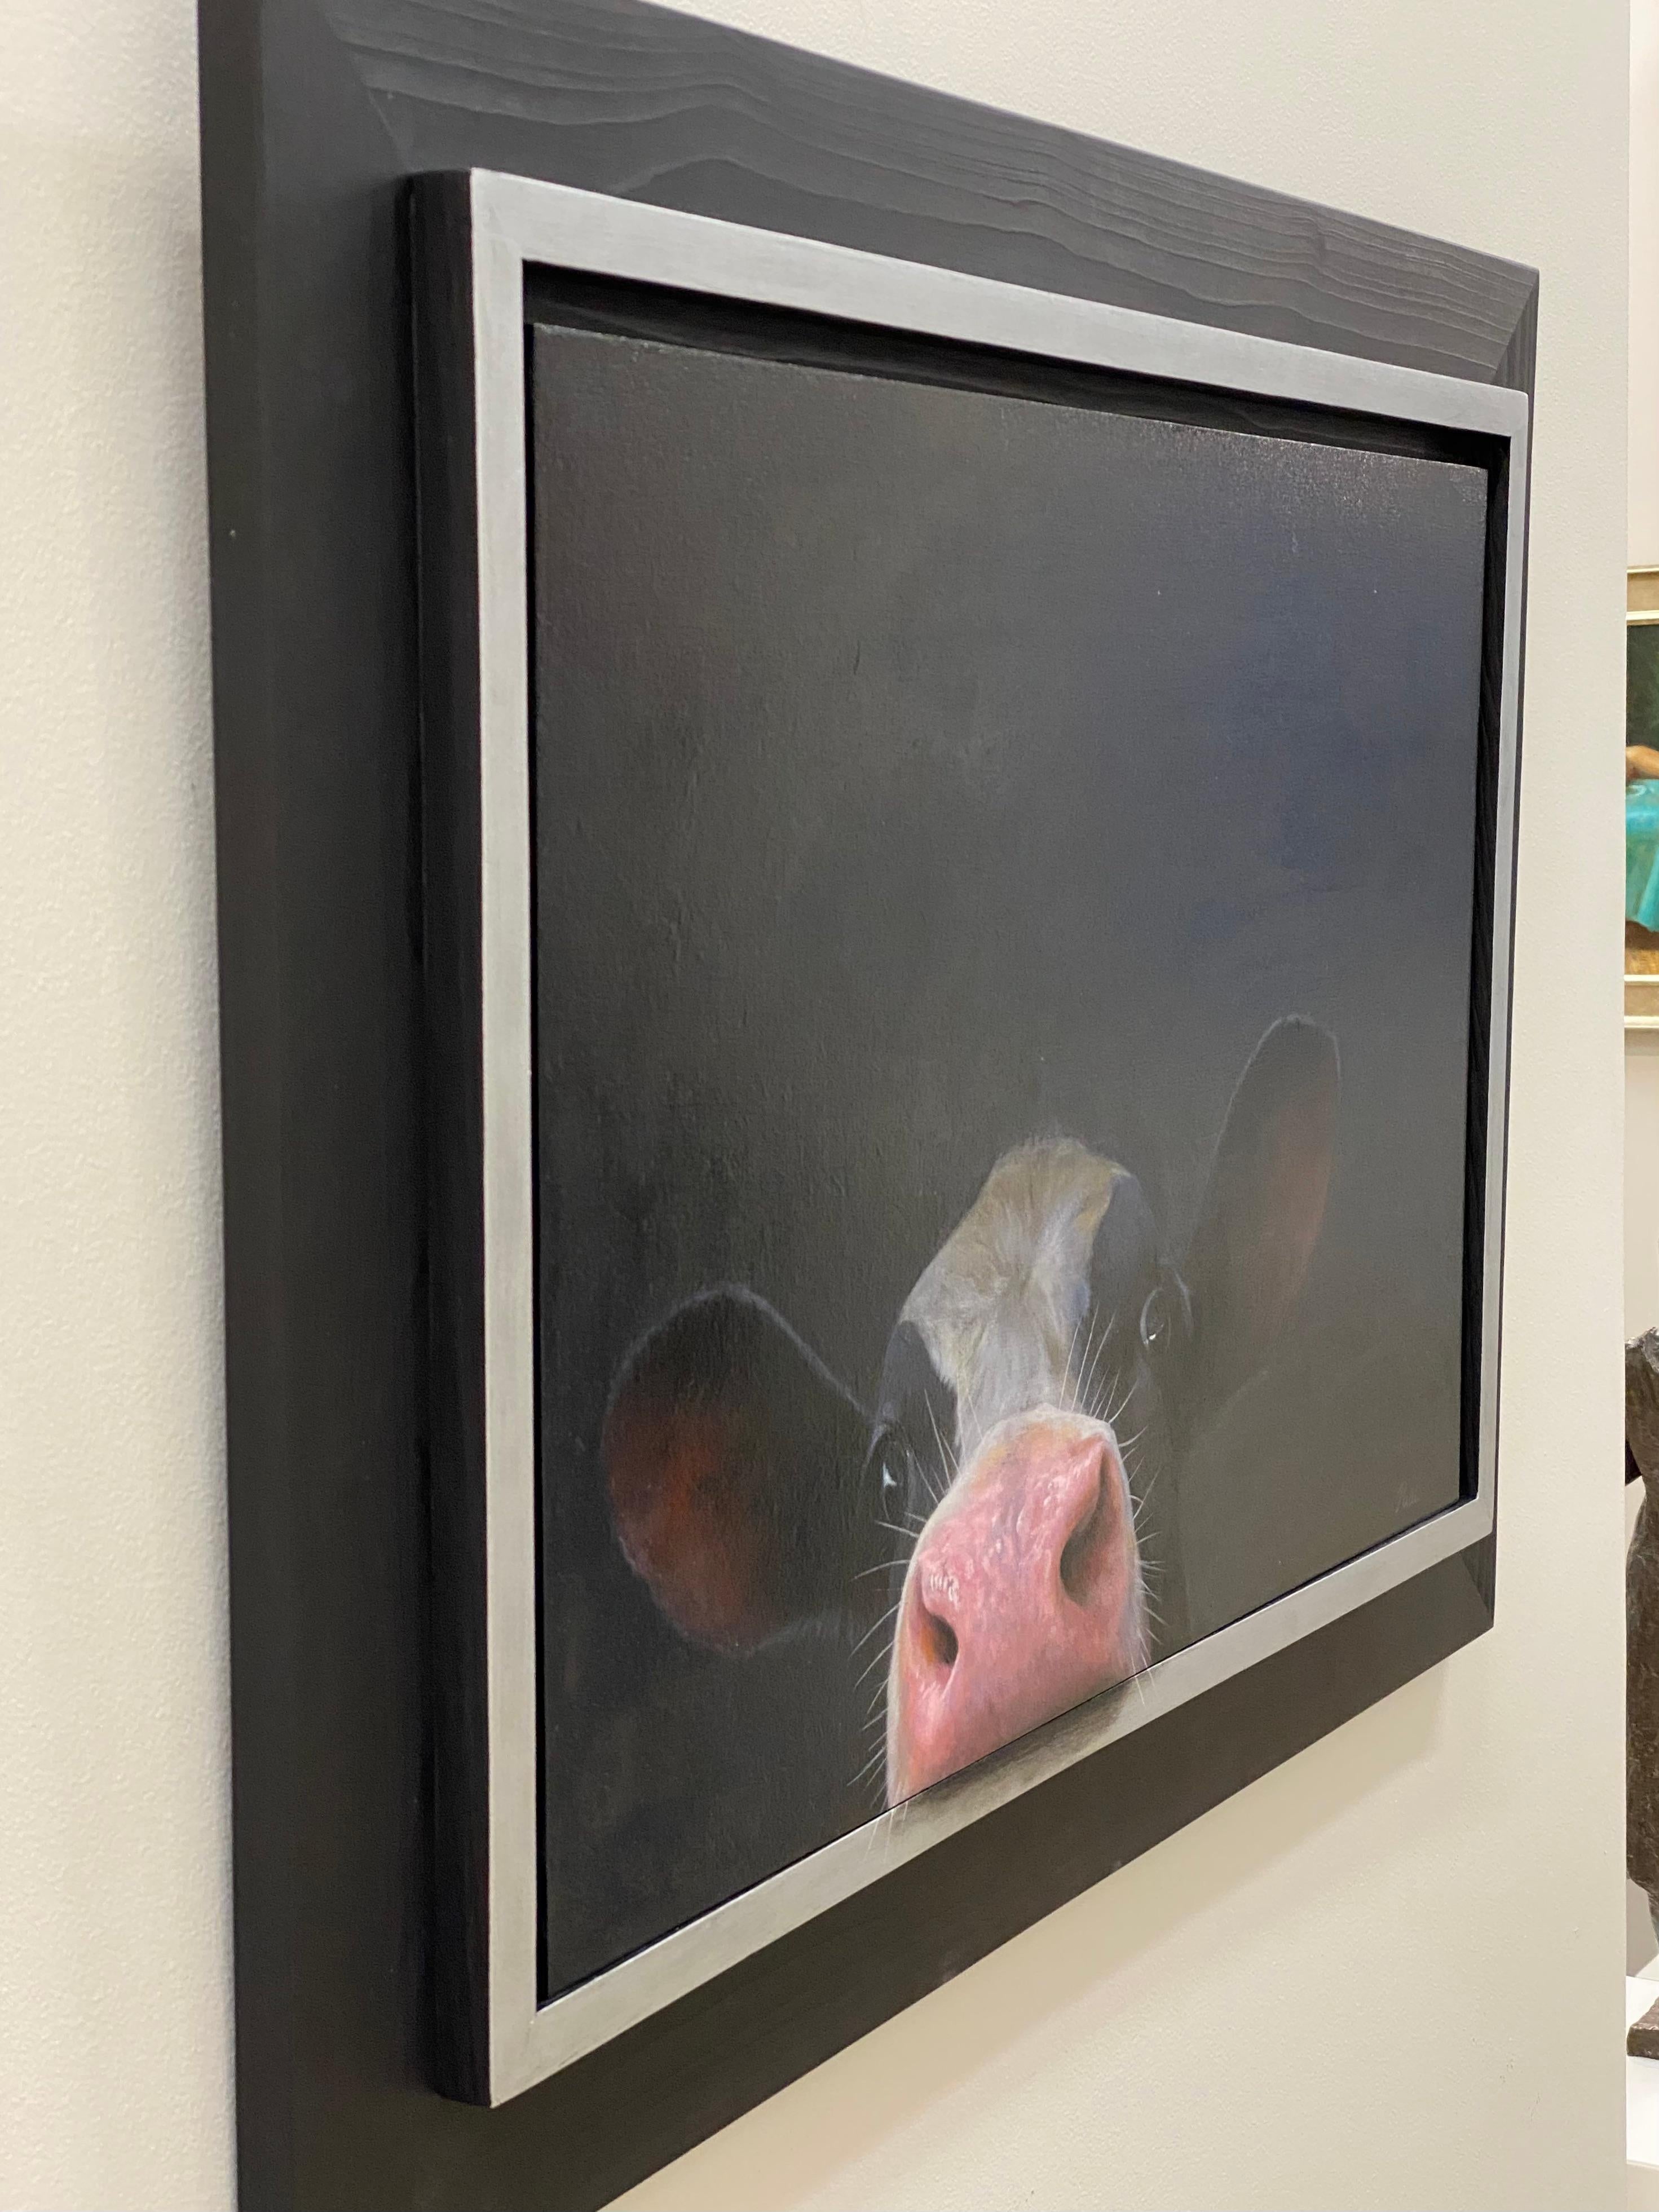 A painting by Paul Jansen
Curious Calf
42 x 61 cm
with frame (included) 56 x 77 cm
Oil on wood panel

The Dutch artist Paul Jansen prefers to paint cow portraits. Jansen looks for cows, examines all types in all possible places. For him, a cow is an